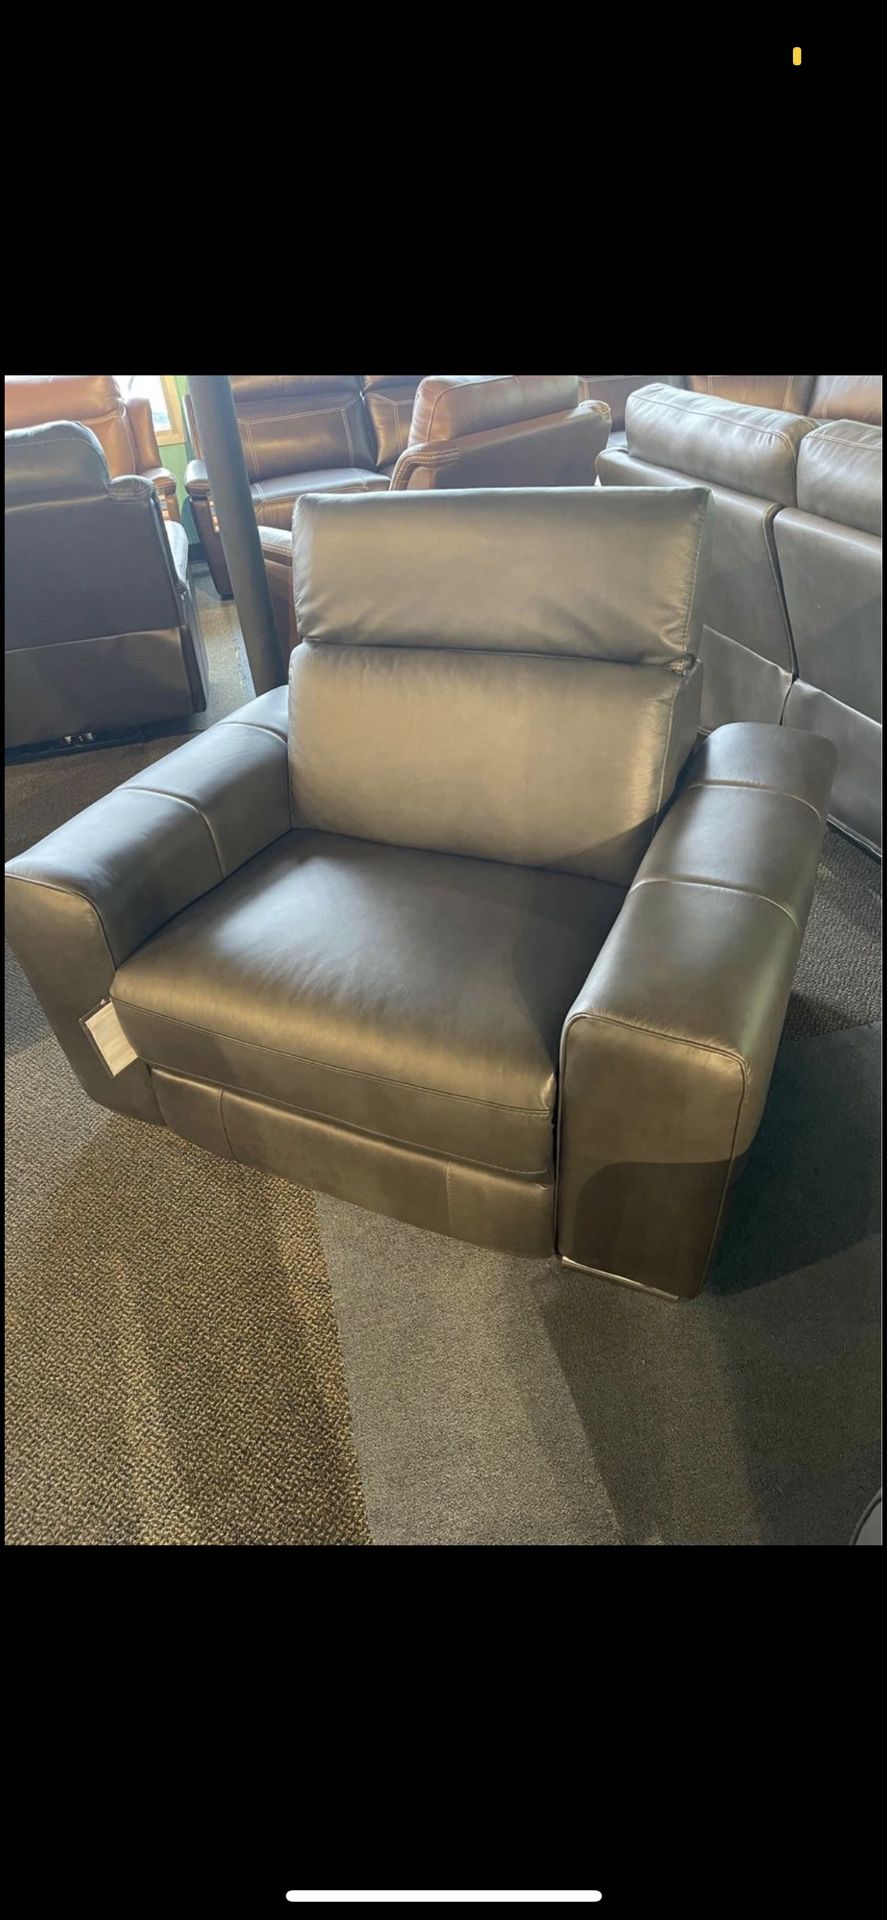 Beautiful Large Italian Leather Reclining sofa set (see description for full cost)